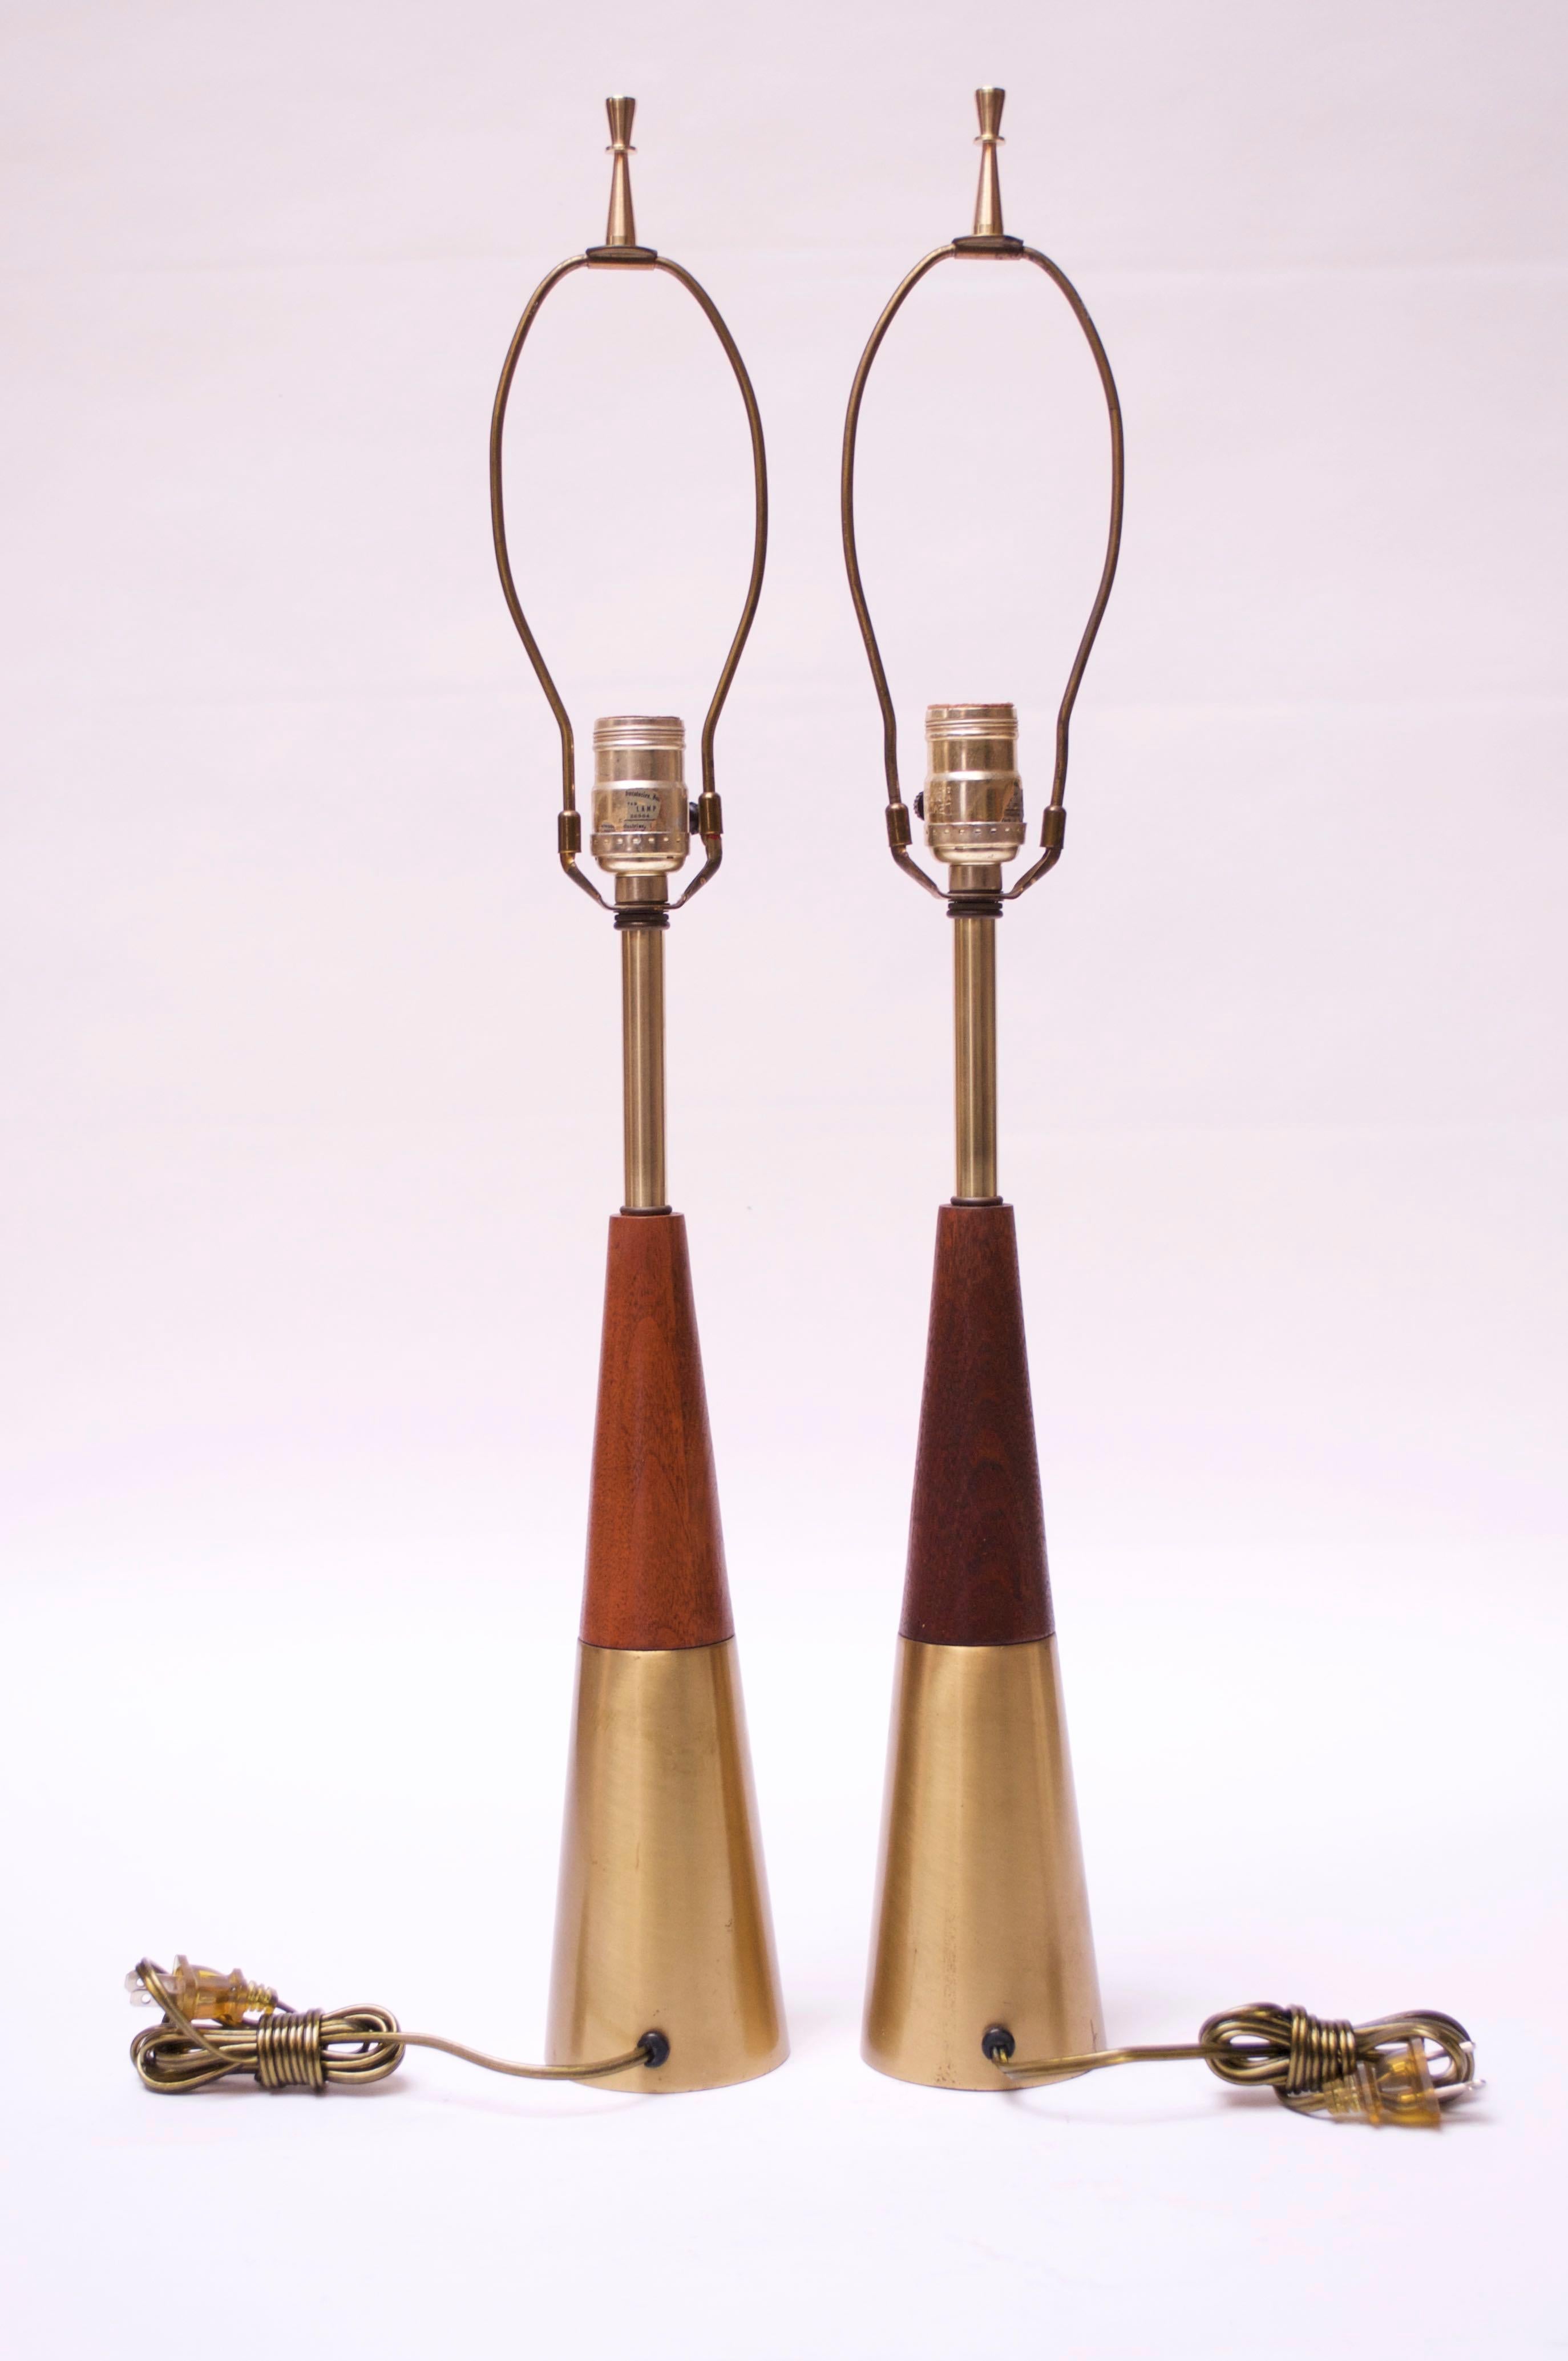 Conical lamps in Swedish brass and solid walnut (Model D390) designed by Tony Paul for Westwood circa 1958.
Include the original finials, scarcely seen with the lamps.
Brass shows spots of wear / tarnish in places, as shown. The walnut has been